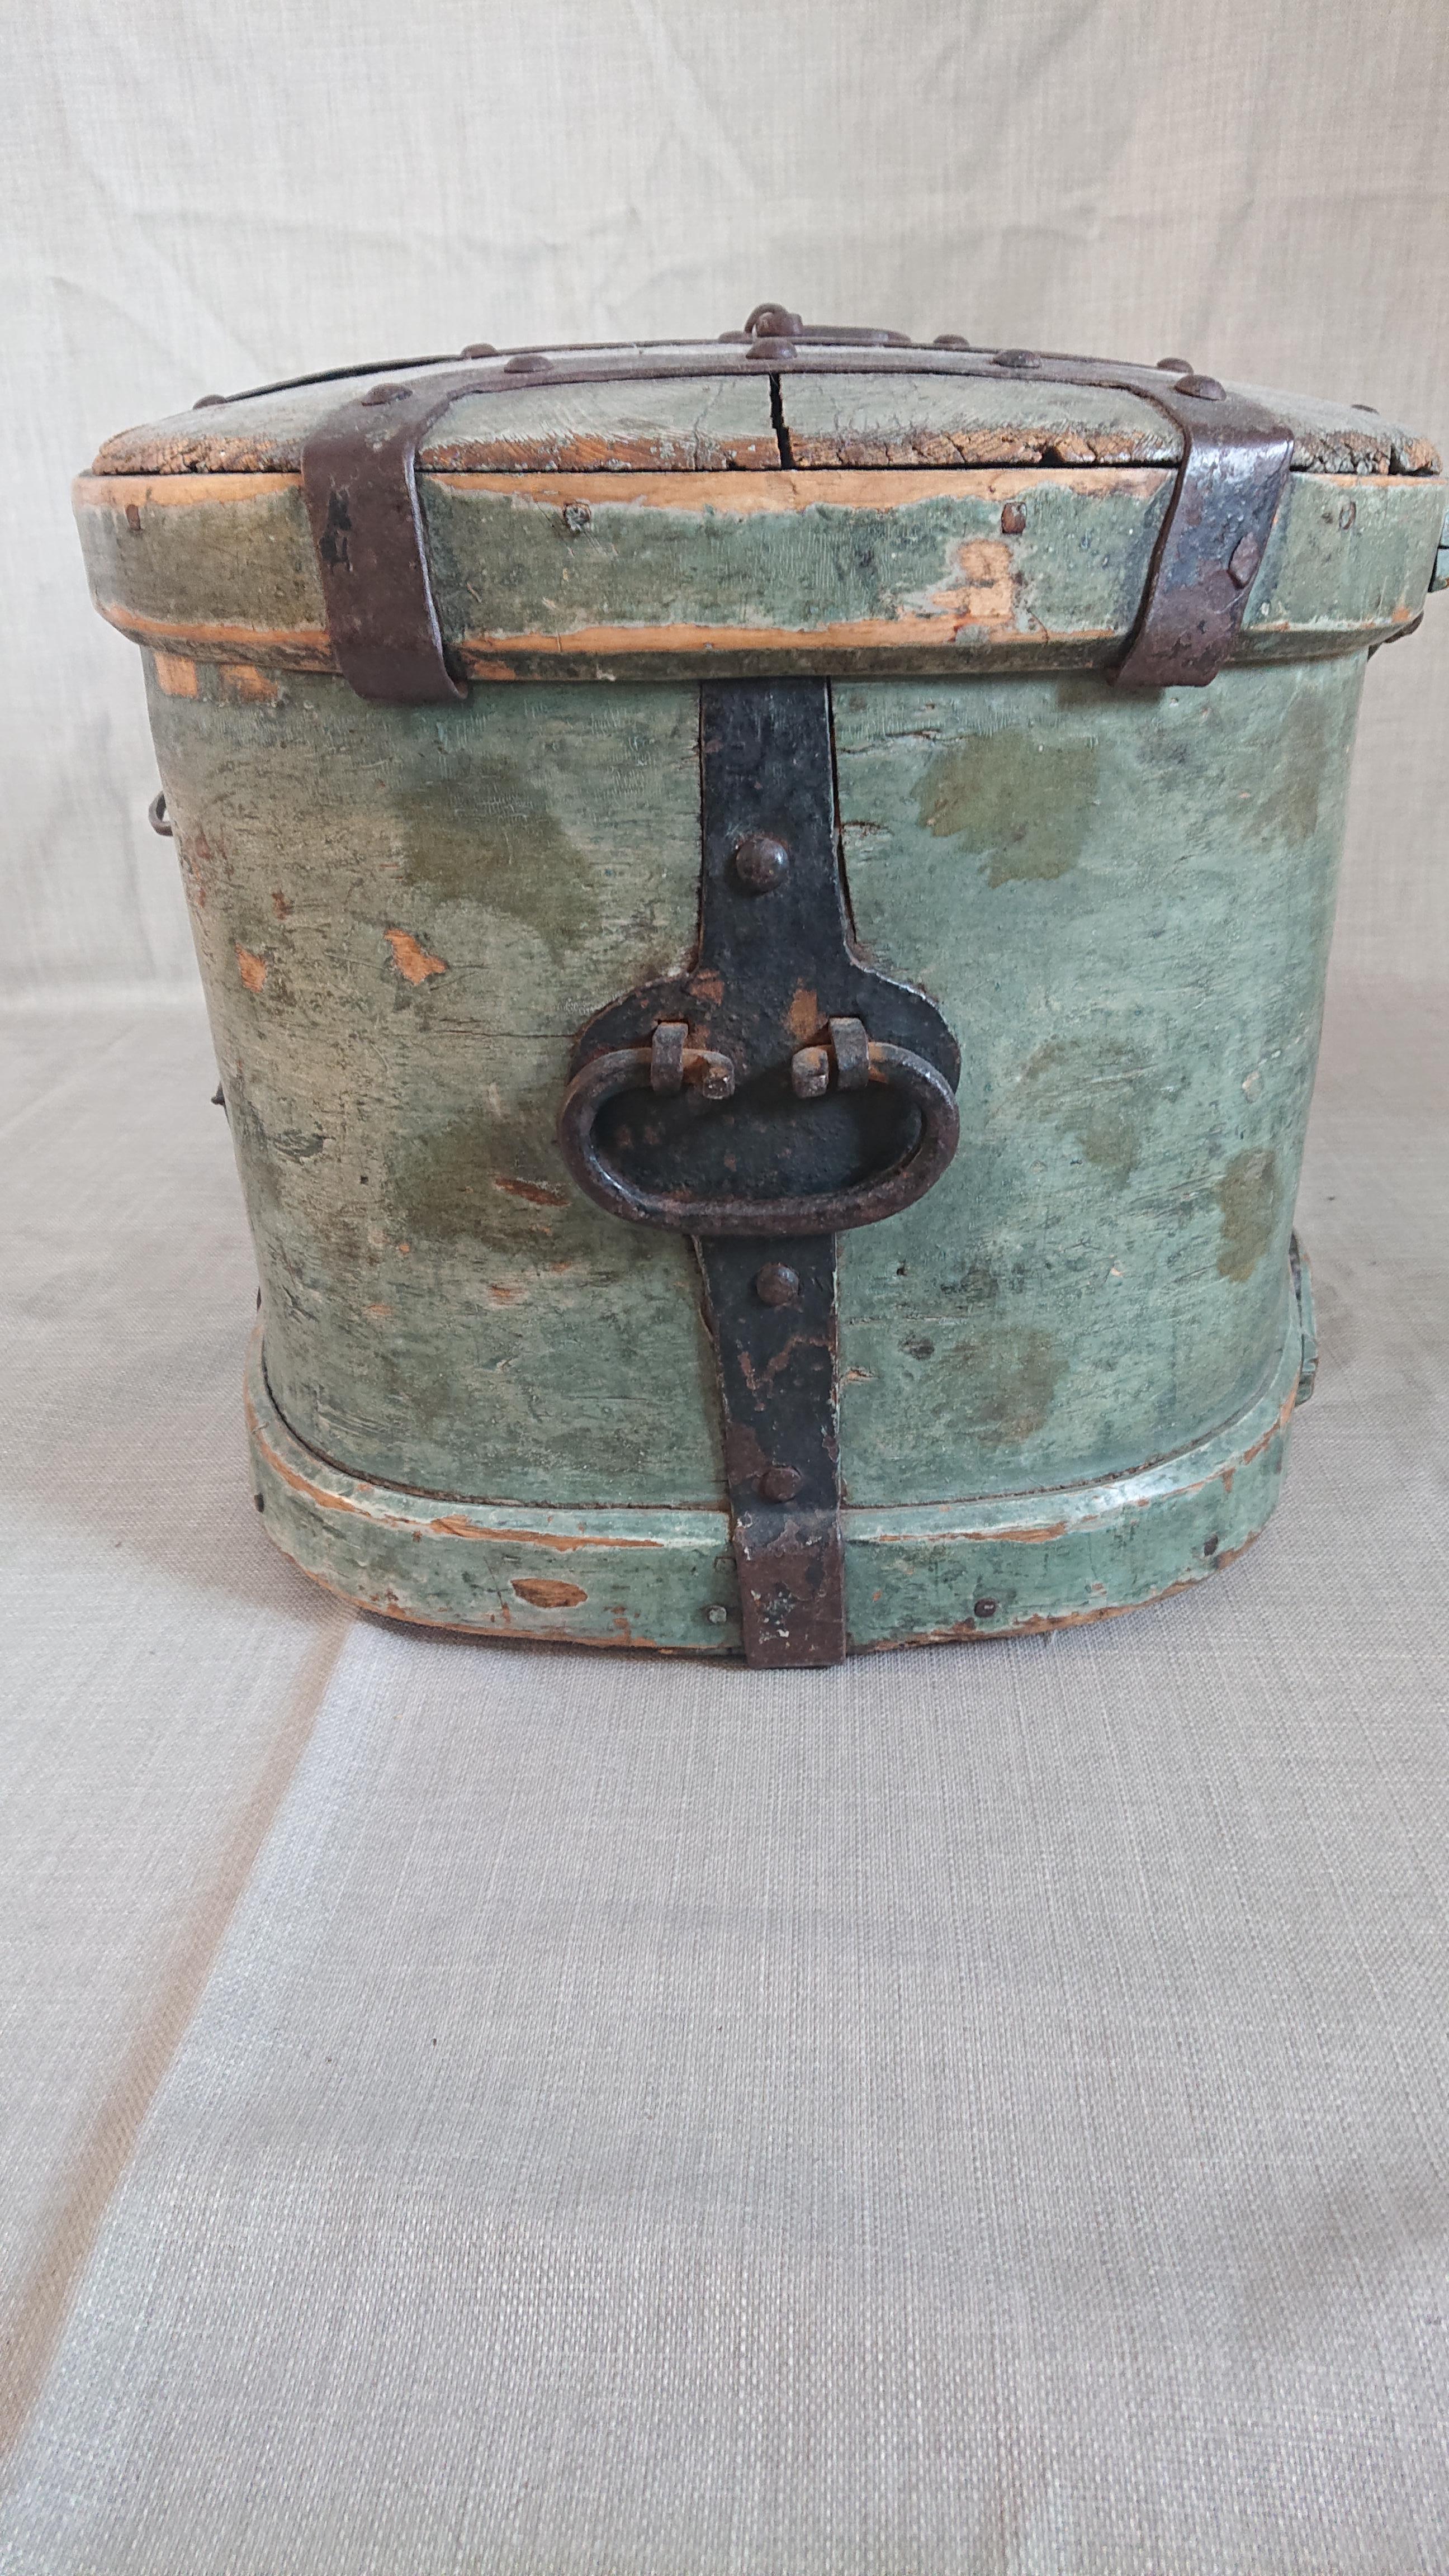 Early 19th century Swedish Folk Art travel box from Skelleftea Vasterbotten, Northern Sweden.
Beautiful untouched originalpaint.
 Decorated with handwrought iron around the box and over the lid.
Original lock & Key.
The box was used to store